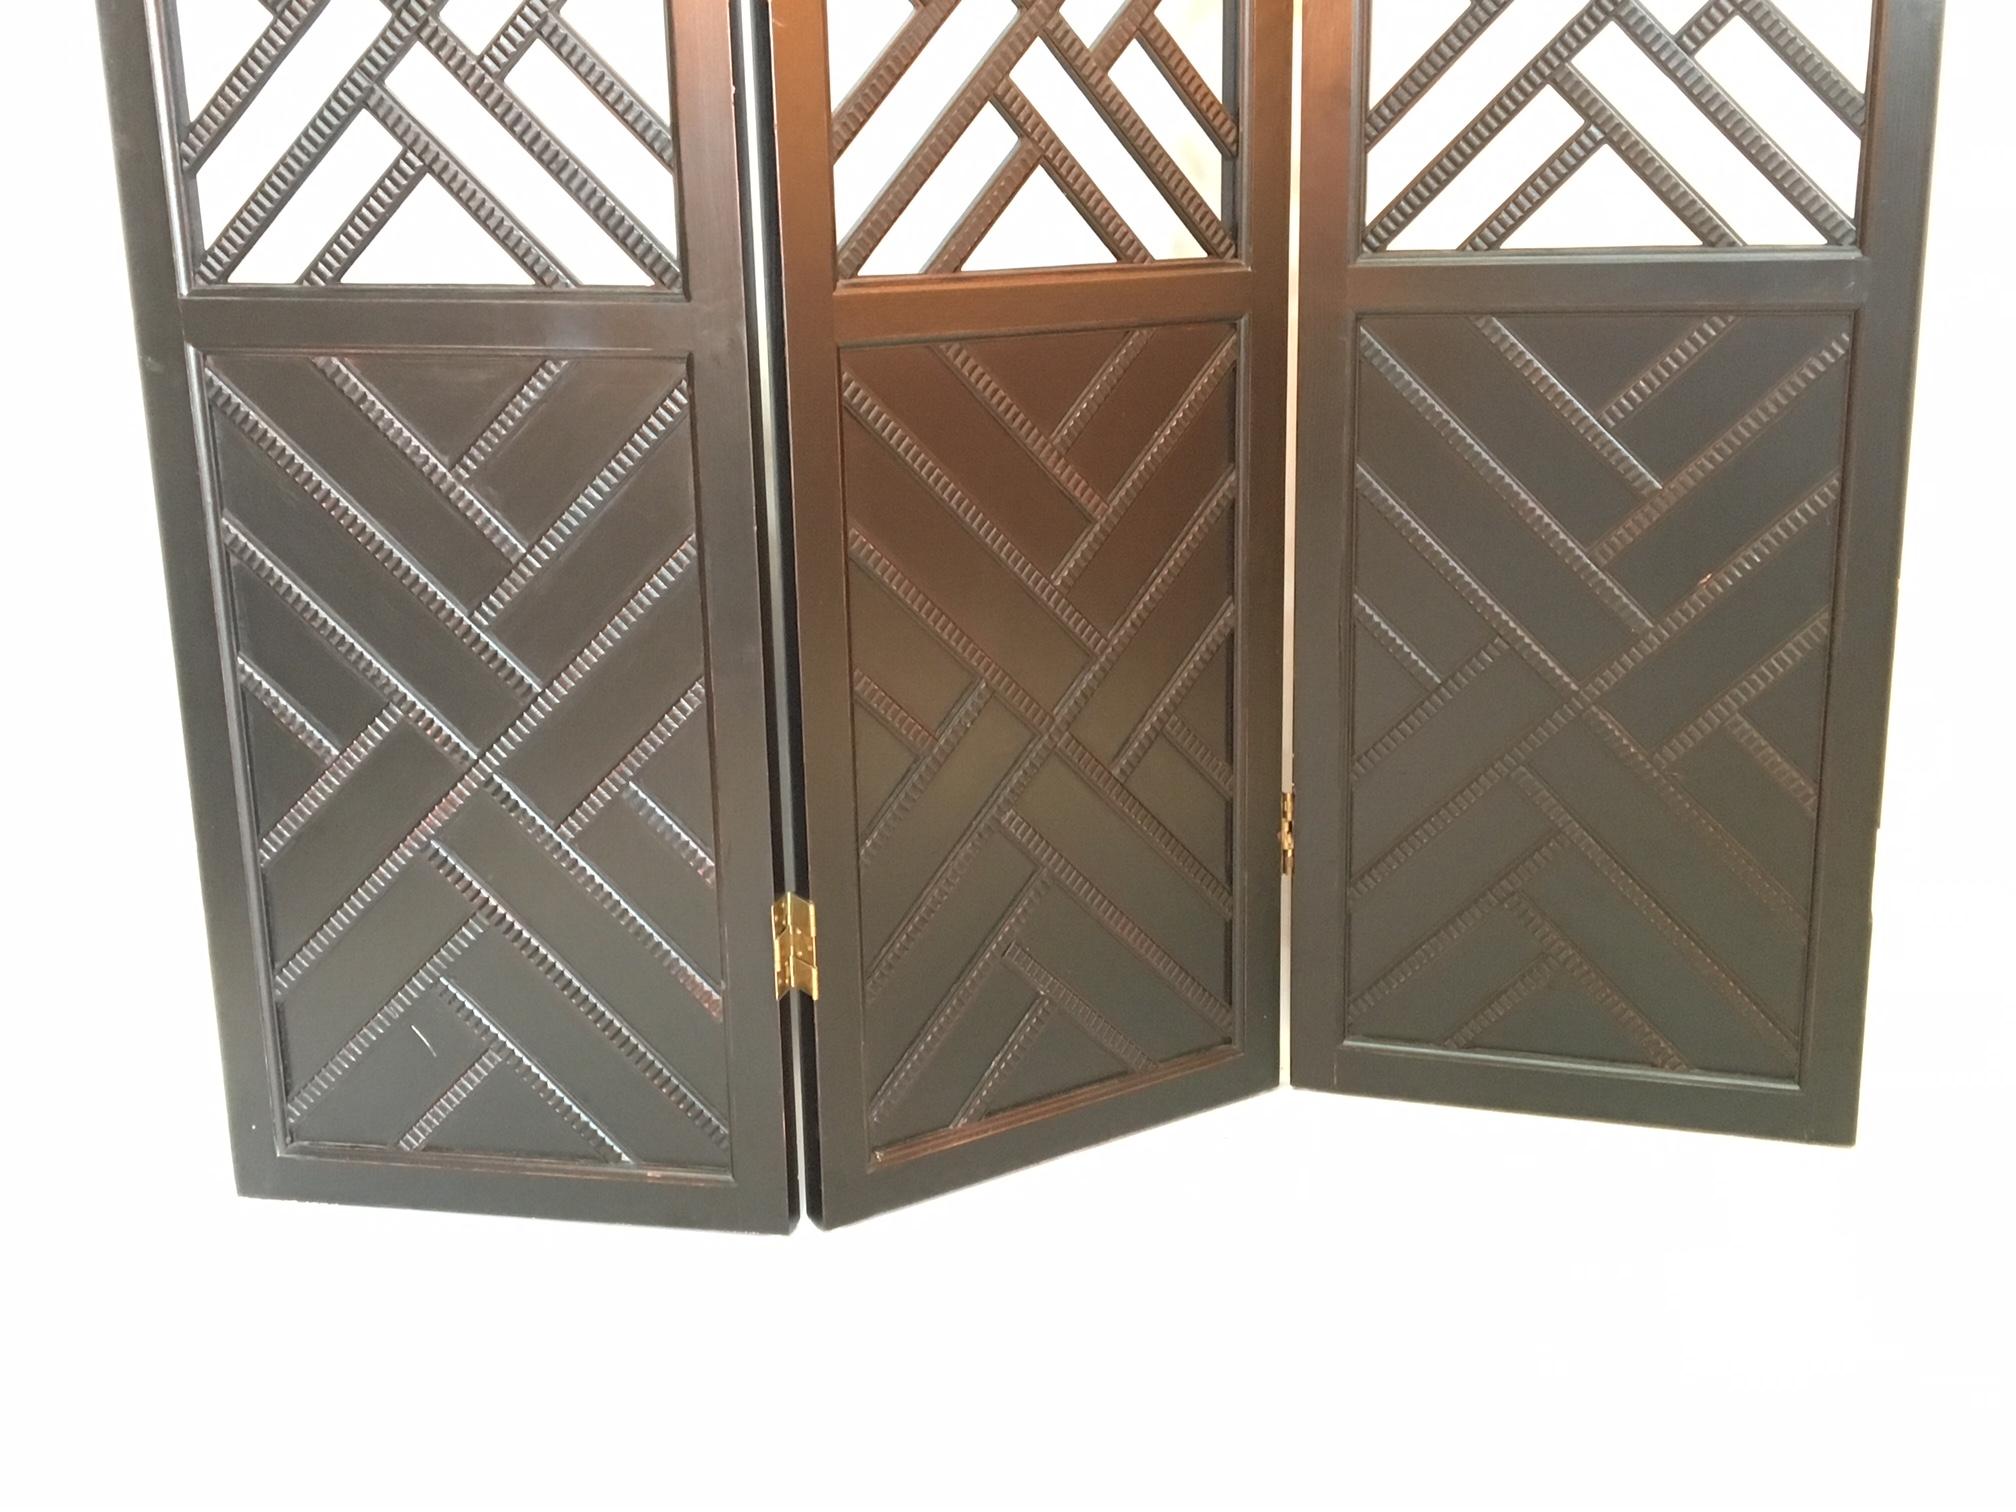 Three panel standing screen in Asian Chippendale style. Perfect for your chinoiserie or Hollywood Regency decor. Good condition with minor abrasions. Stands just over 76